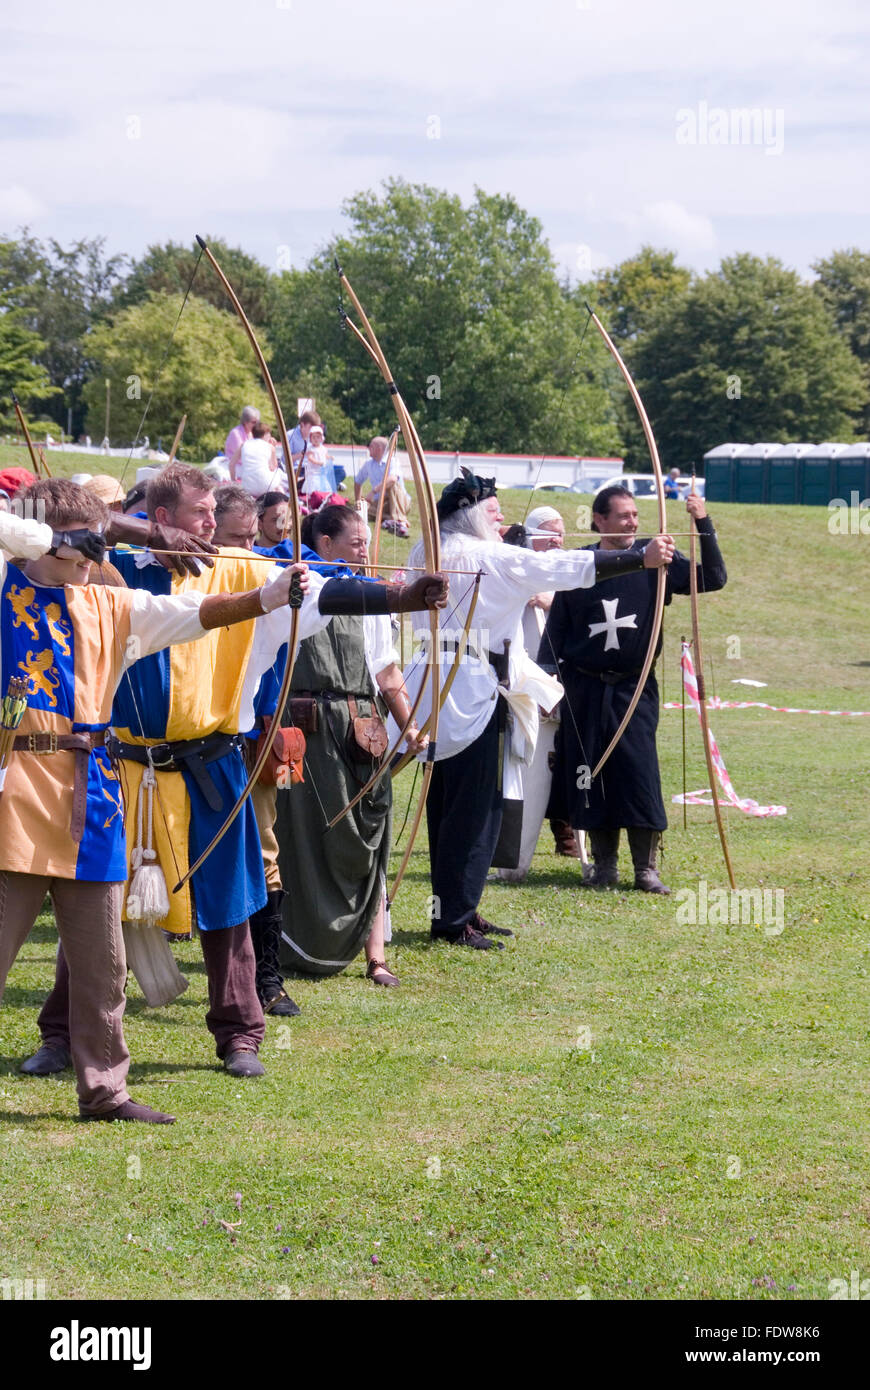 TEWKESBURY, GLOC. UK-11 JULY: Re-enactors in costume compete in longbow archery competition on 11 July 2014 at Tewkesbury Mediev Stock Photo